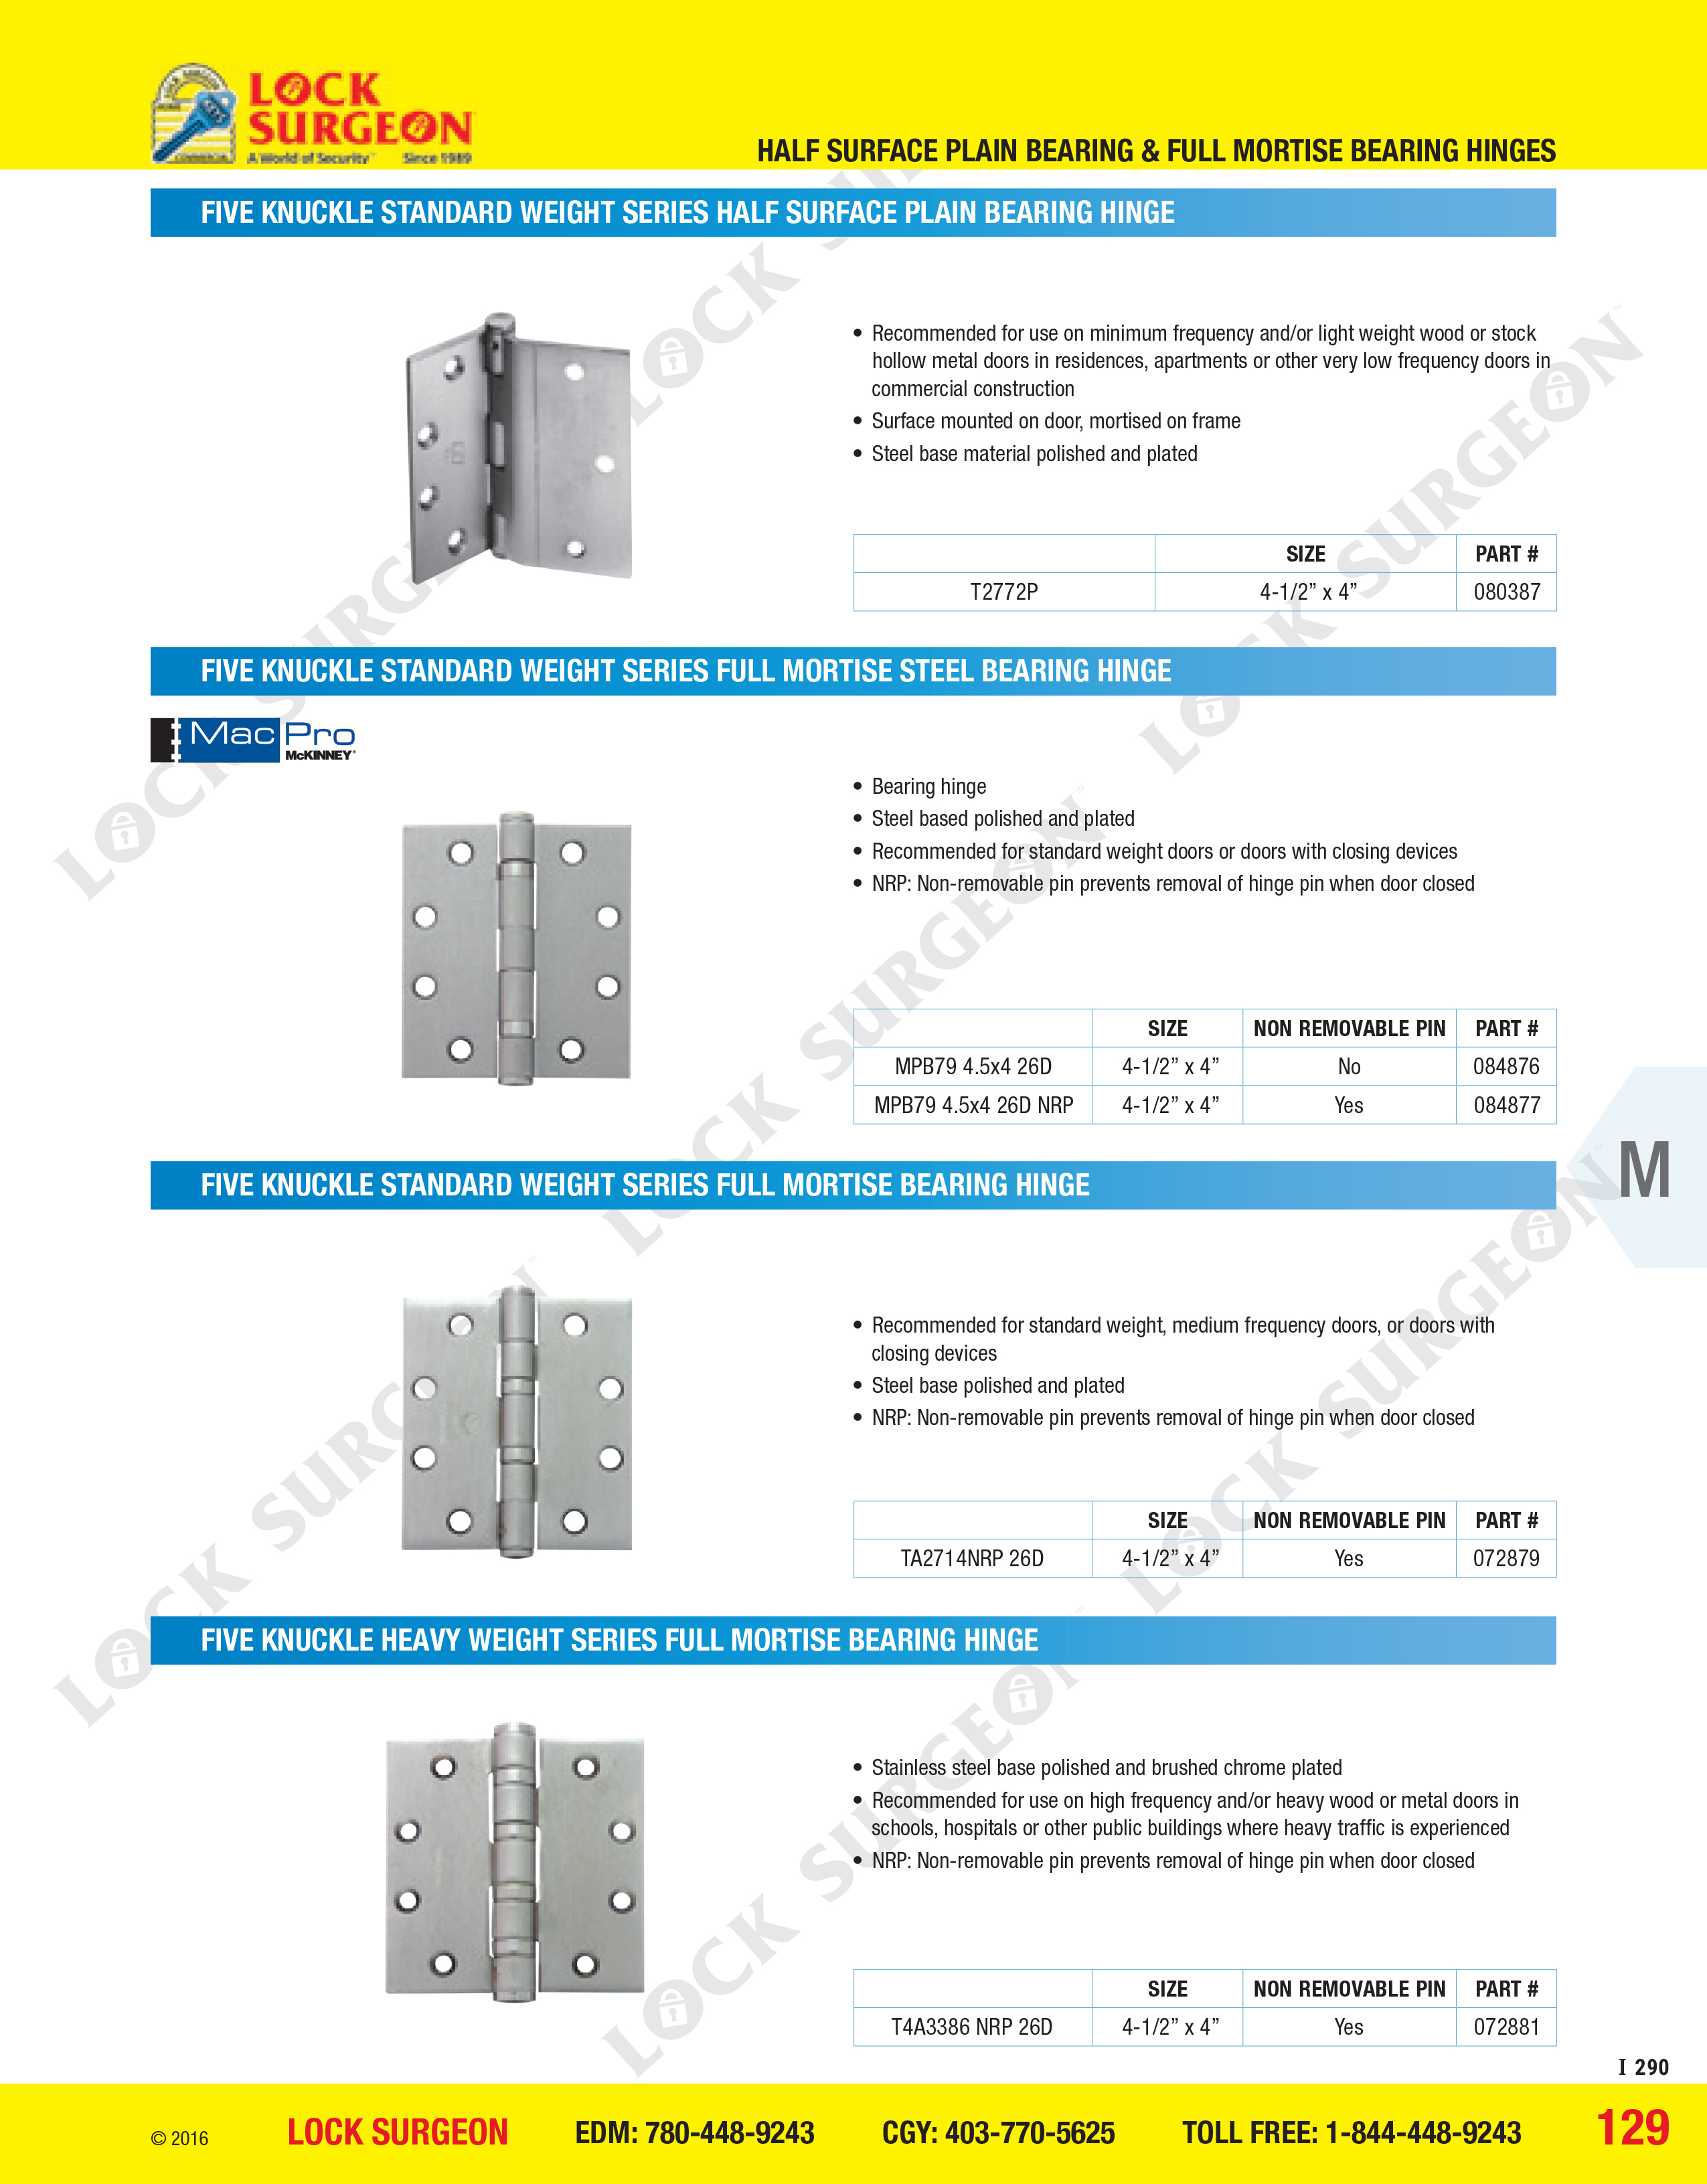 Half-surface plain bearing and full mortise bearing hinges Acheson.